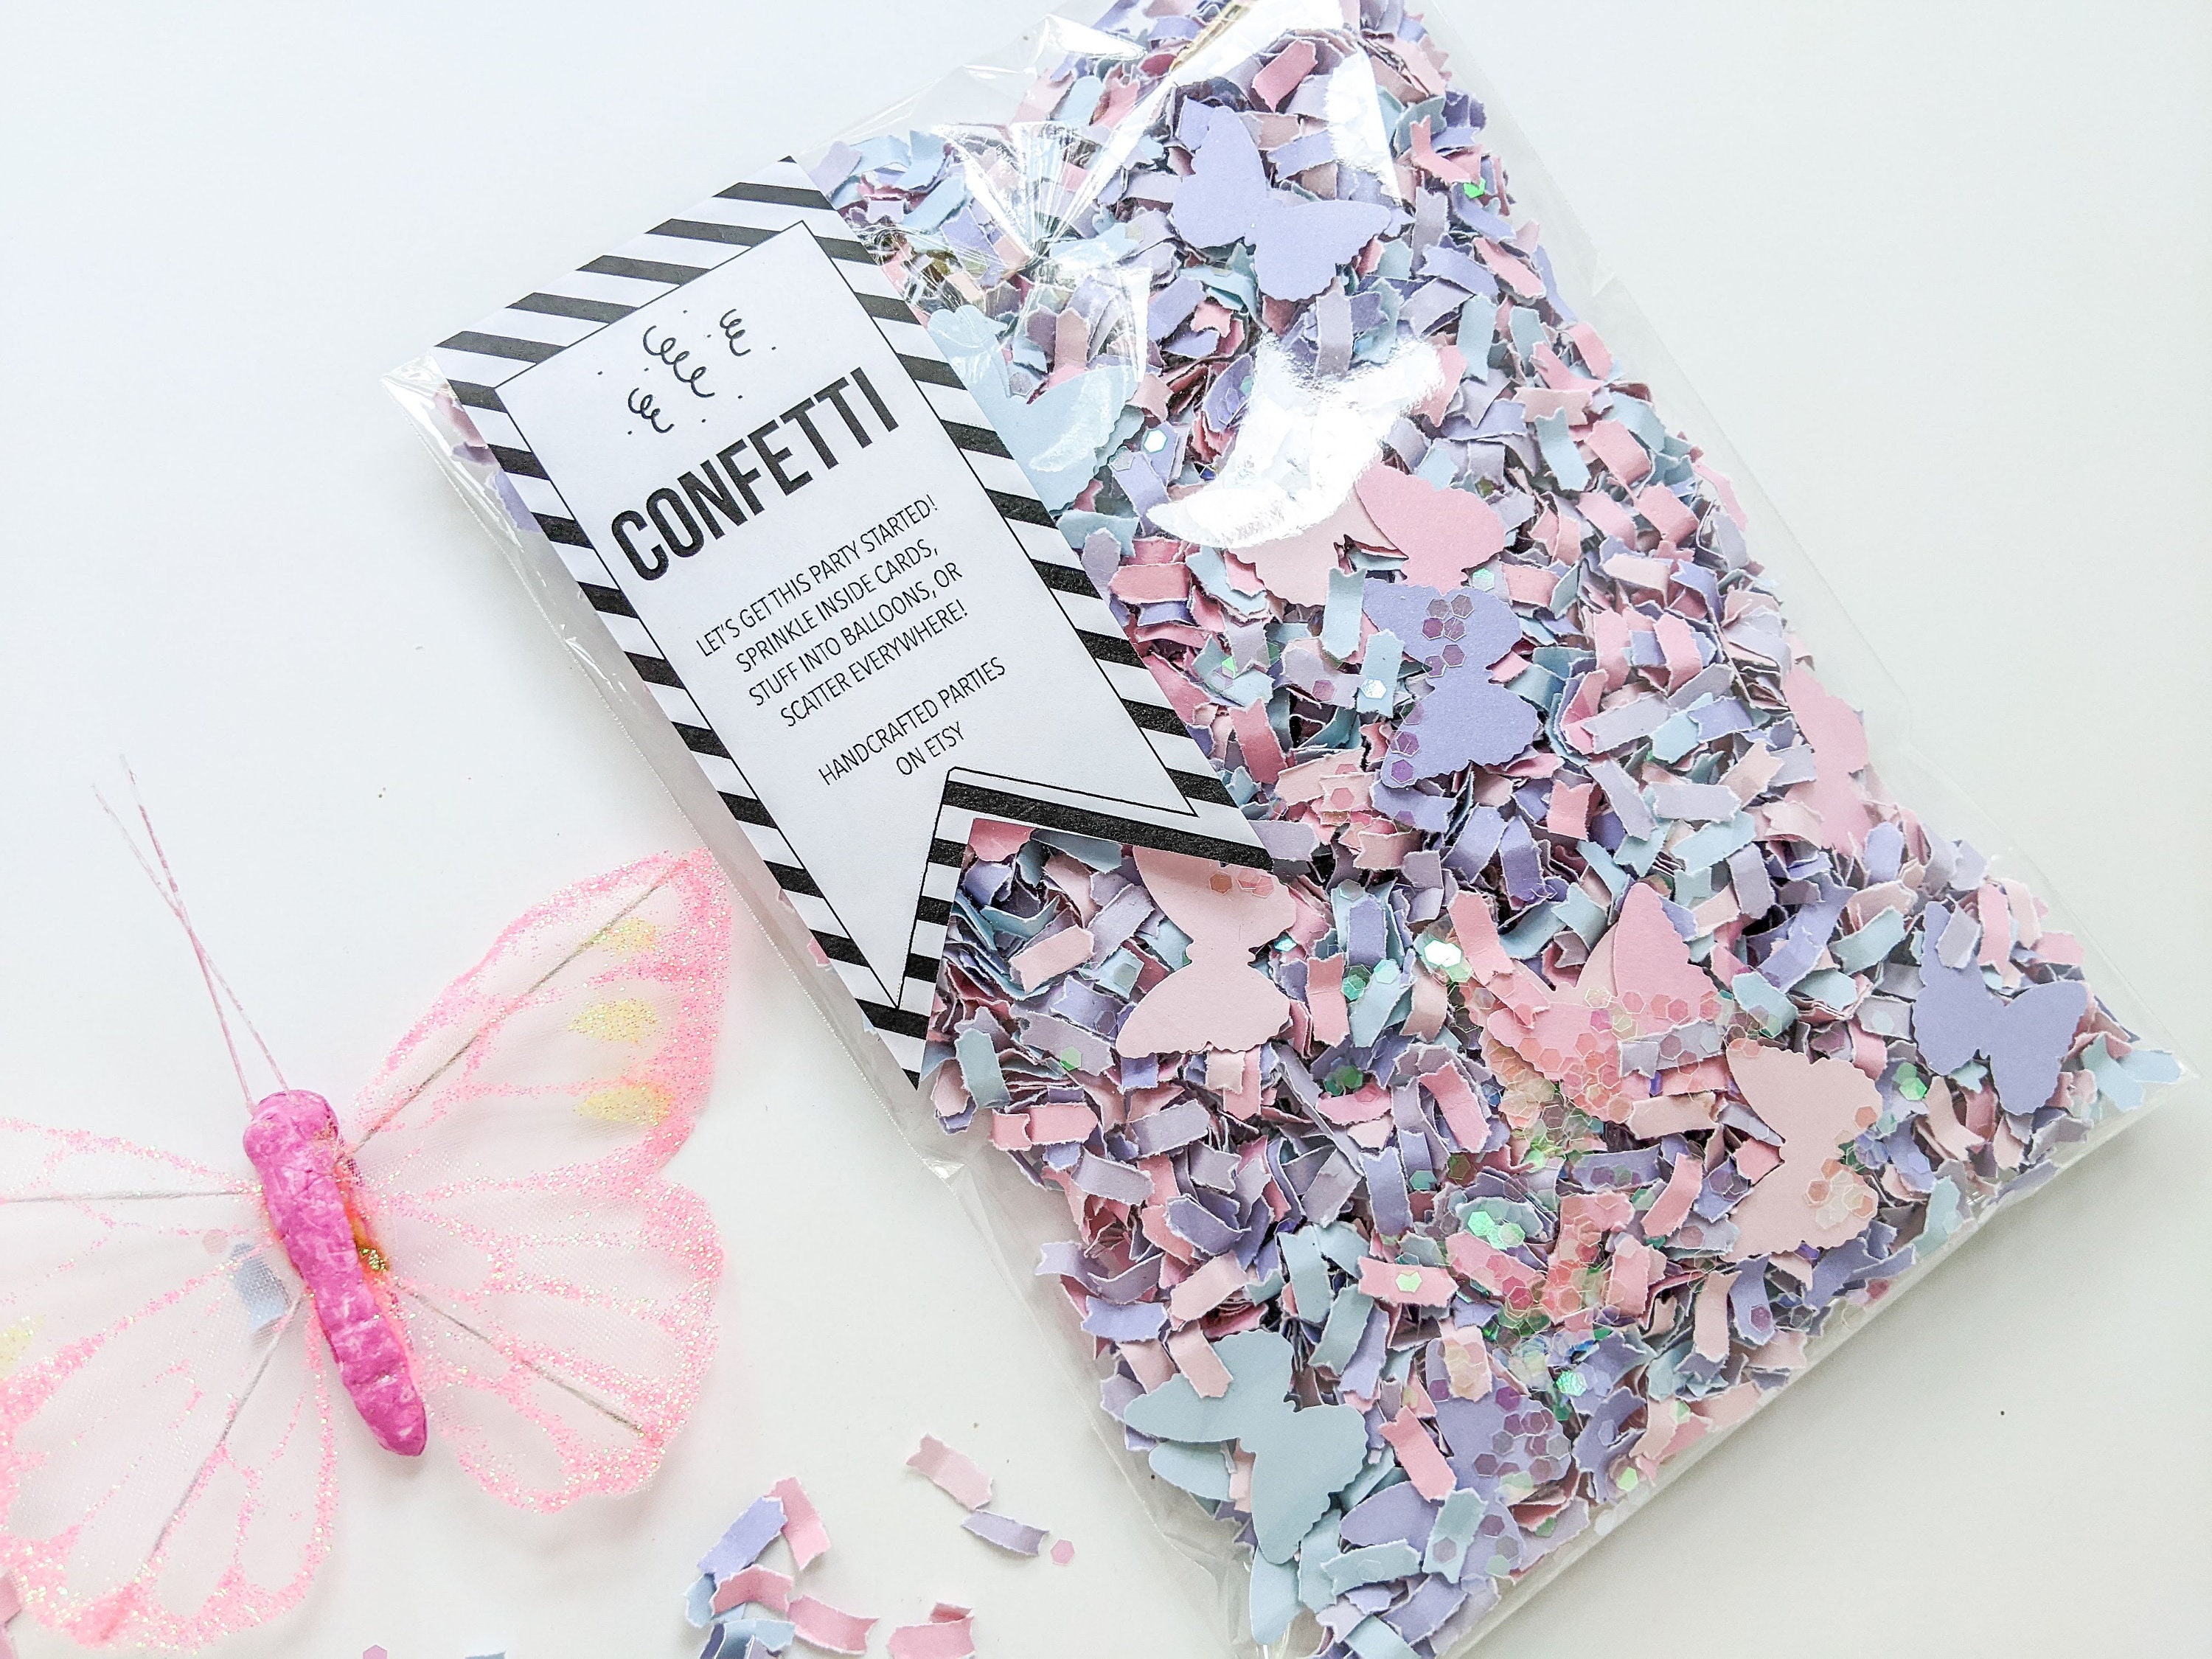 Limitless Colorful Confetti - Premium 5000 Pieces 1-Inch Round Tissue Paper Confetti - Specially Crafted for Unicorn Parties